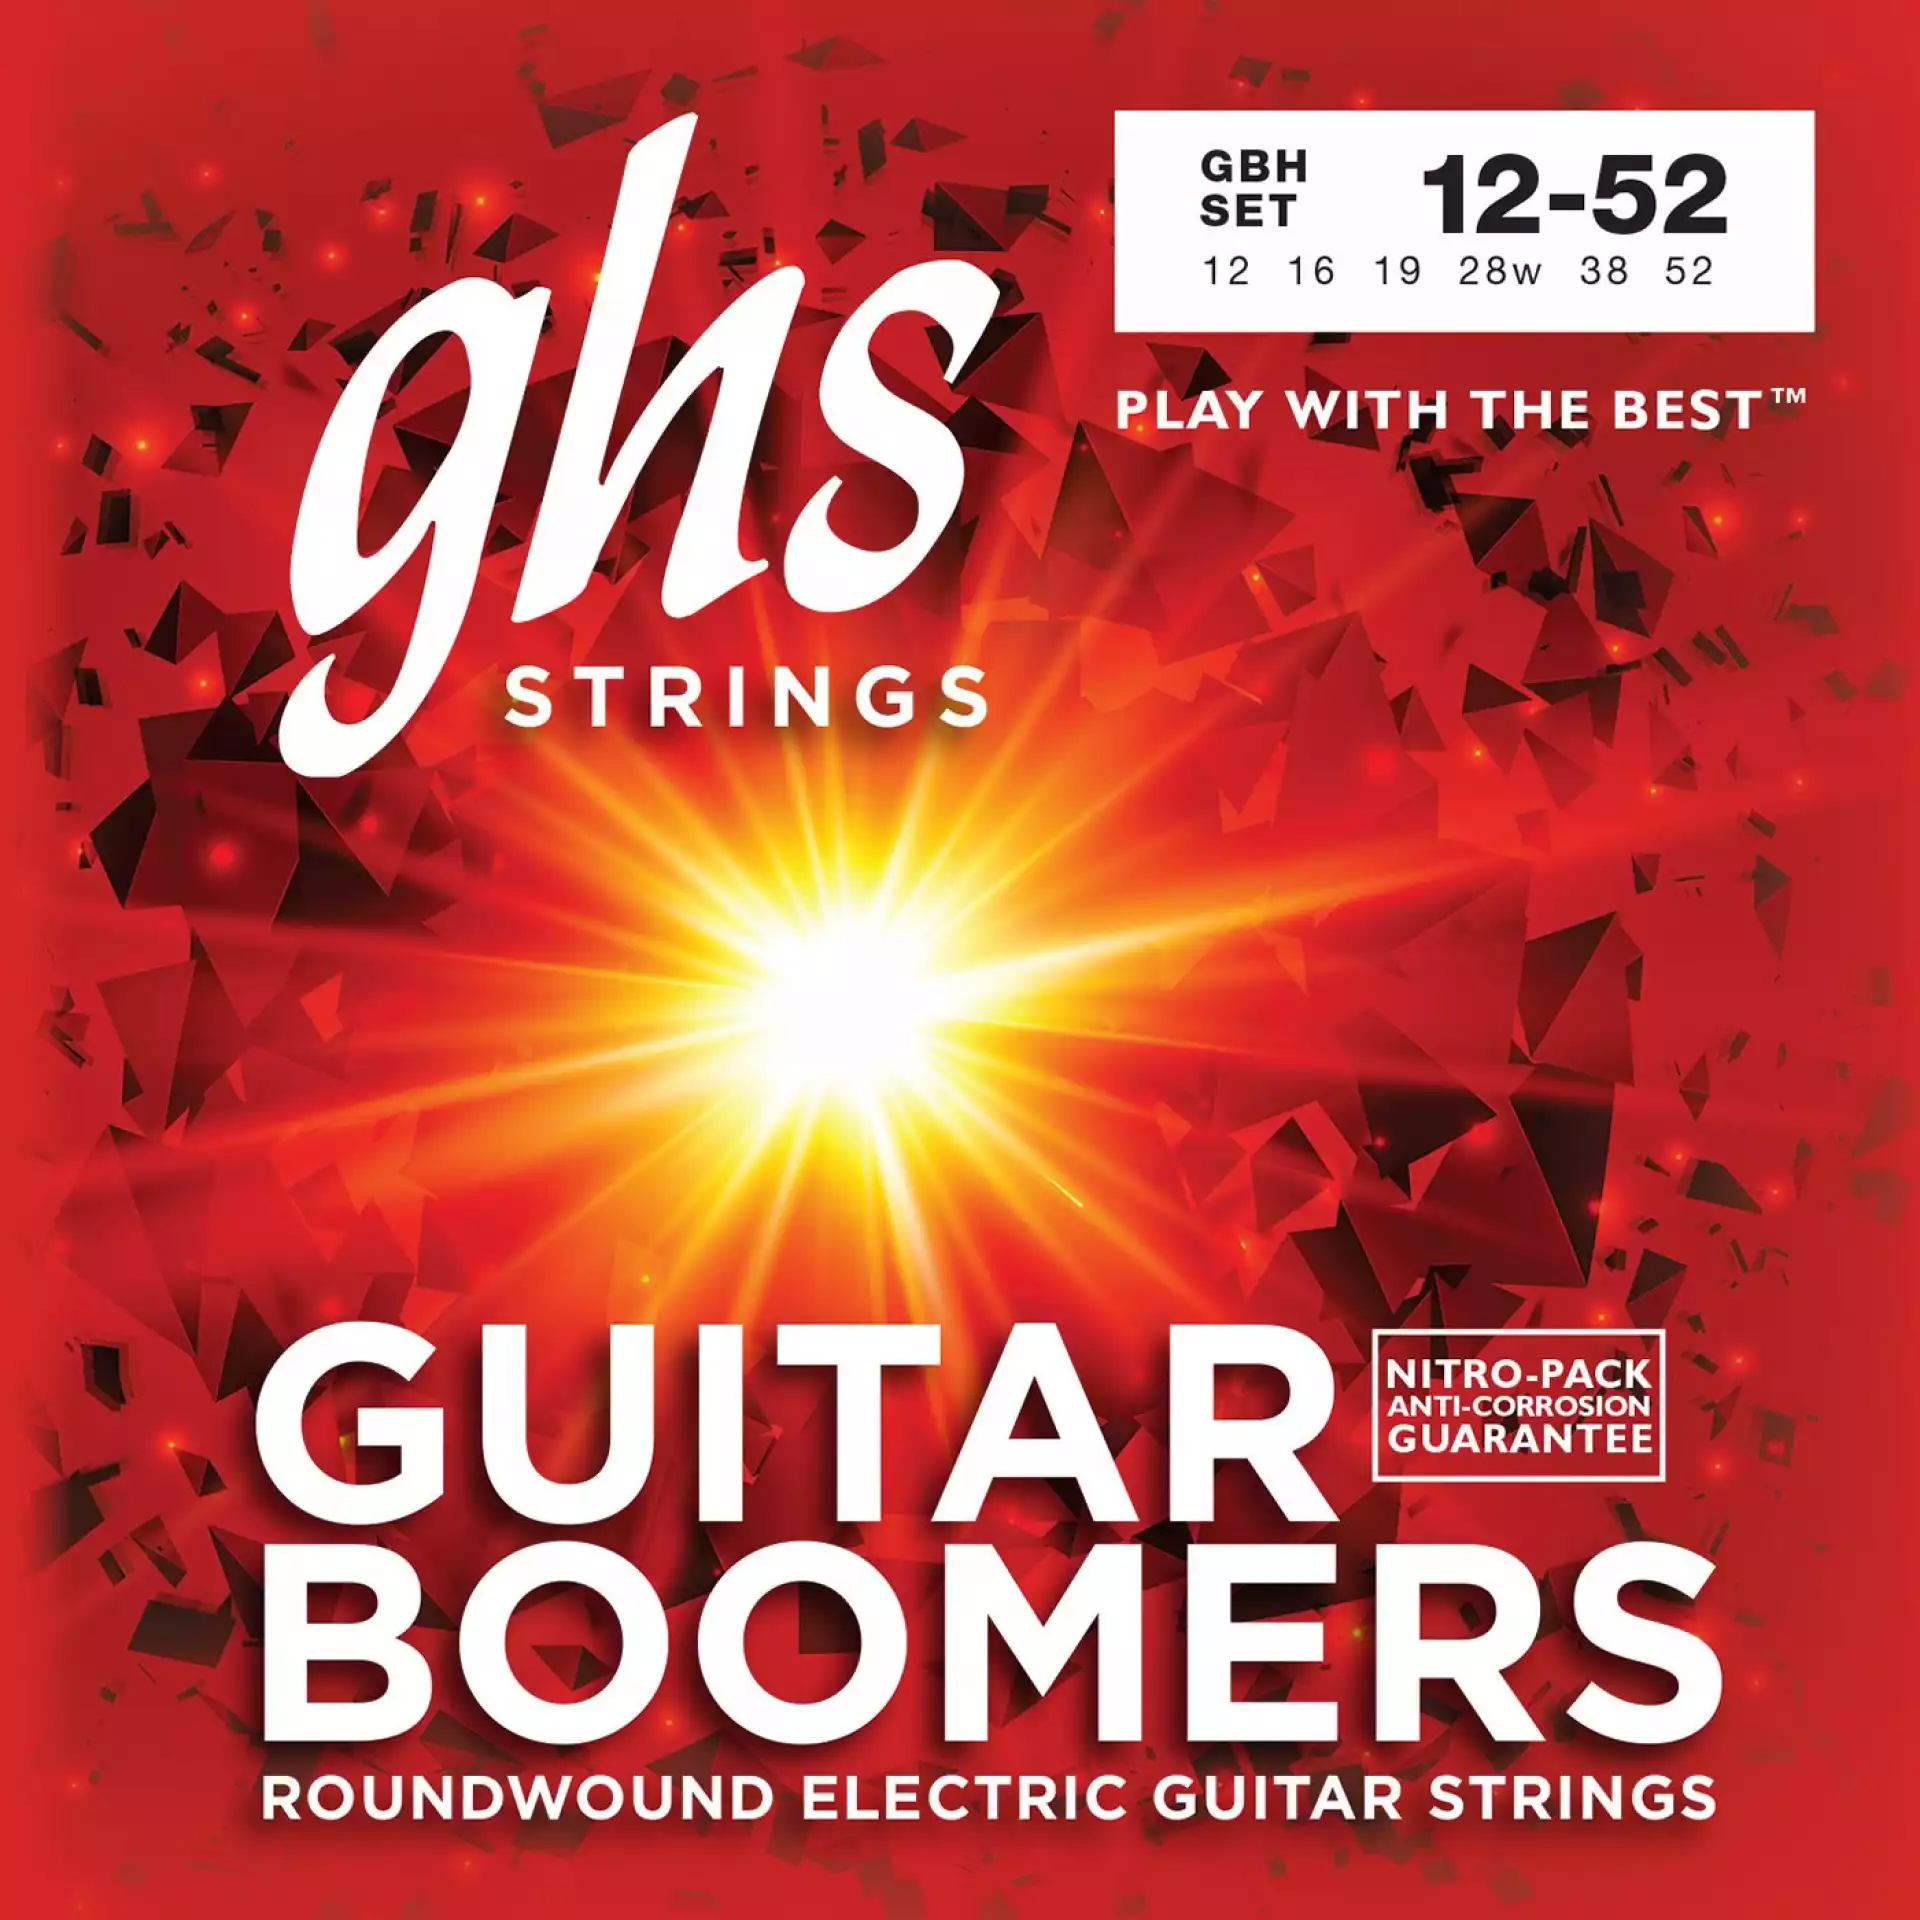 GHS GBH Boomers Roundwound Heavy Electric Guitar Strings (6-String Set, 12 - 52)